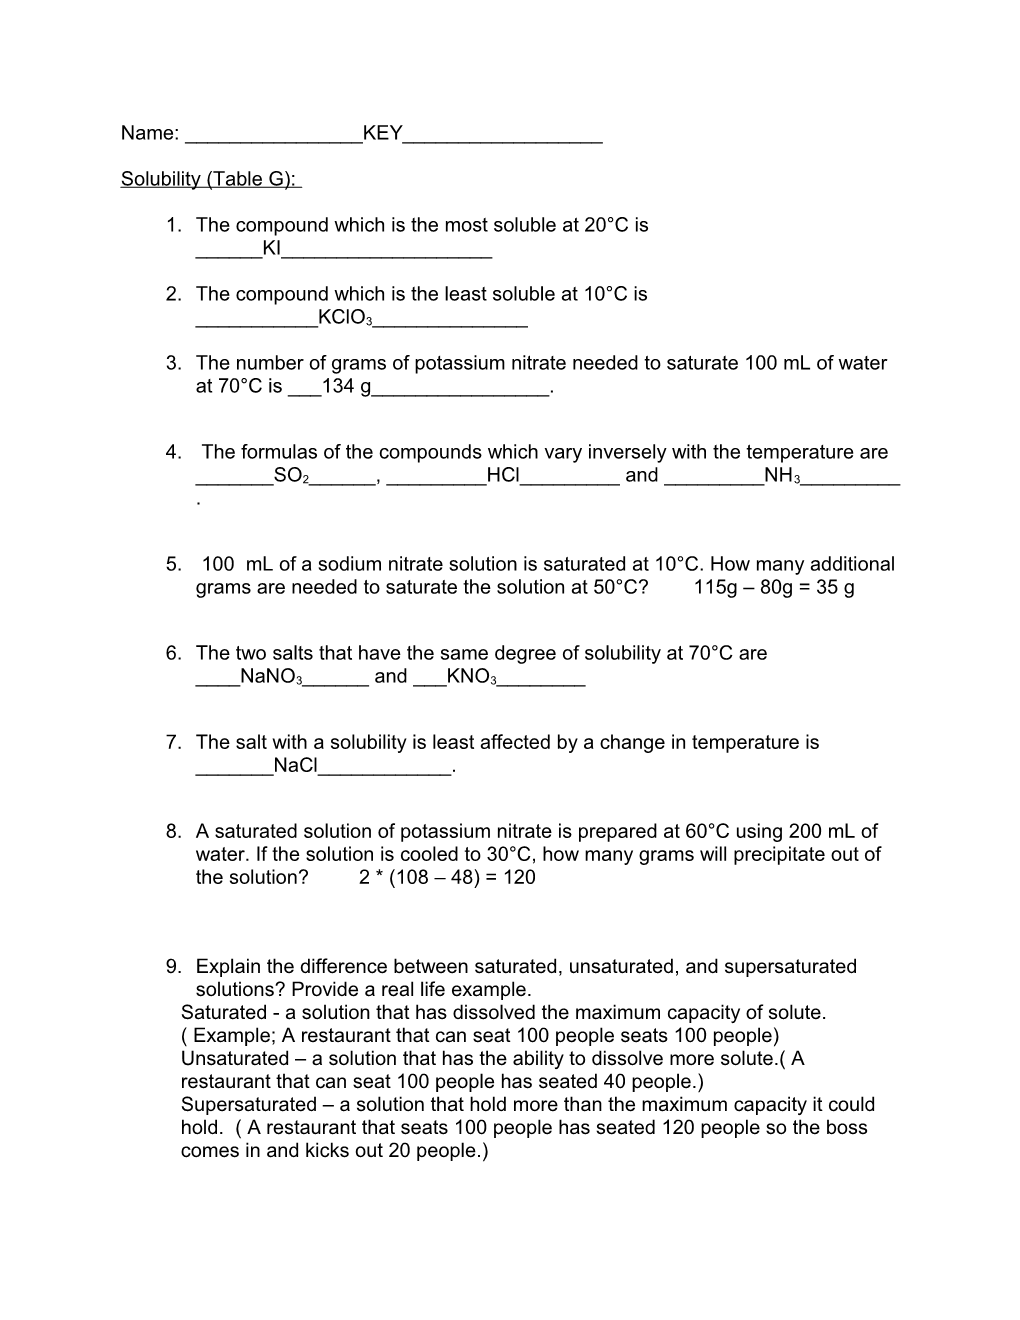 Solubility (Table G)